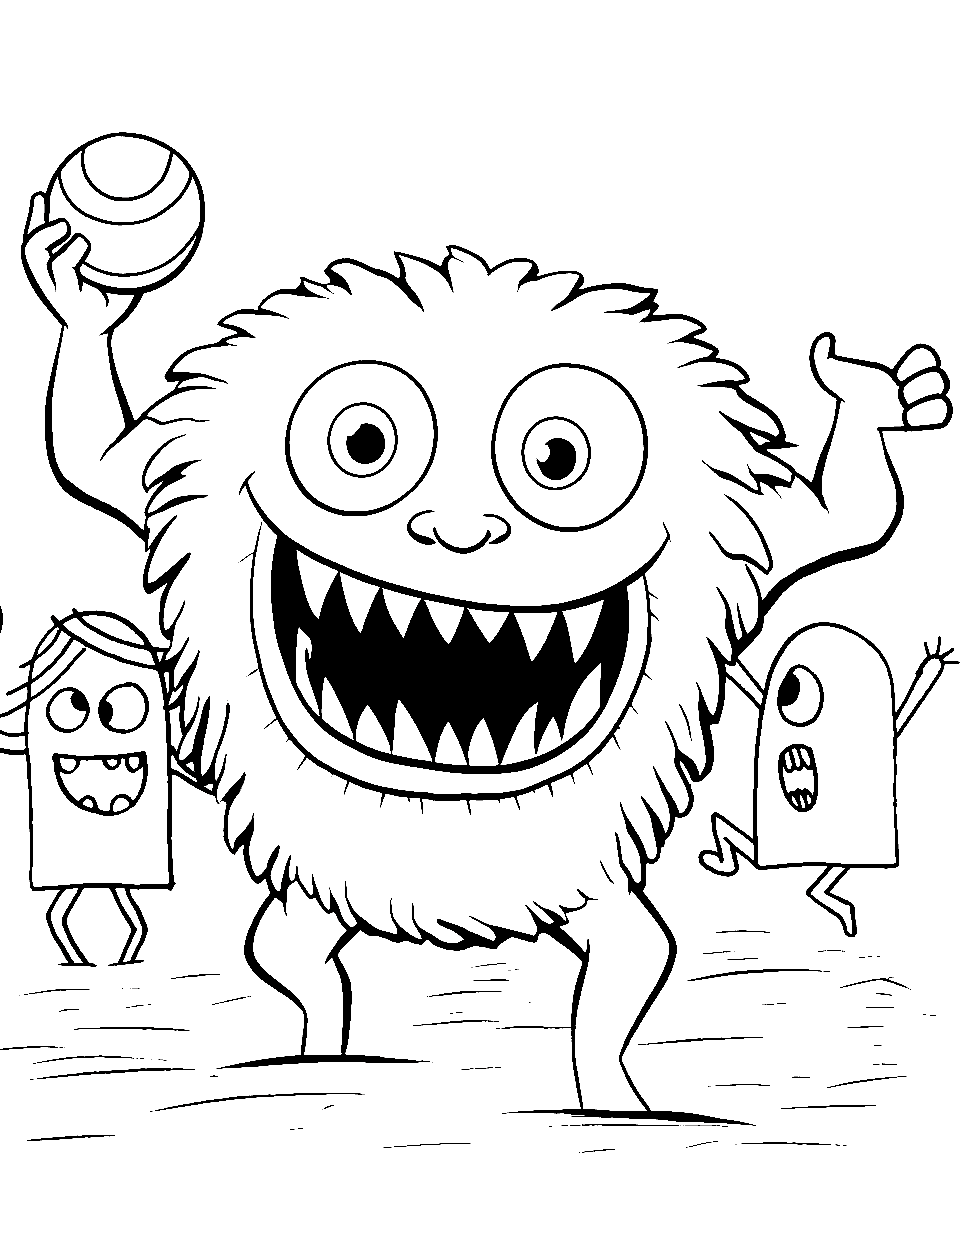 Monsters Playing Volleybal Monster Coloring Page - Energetic monsters playing volleyball on a beach.